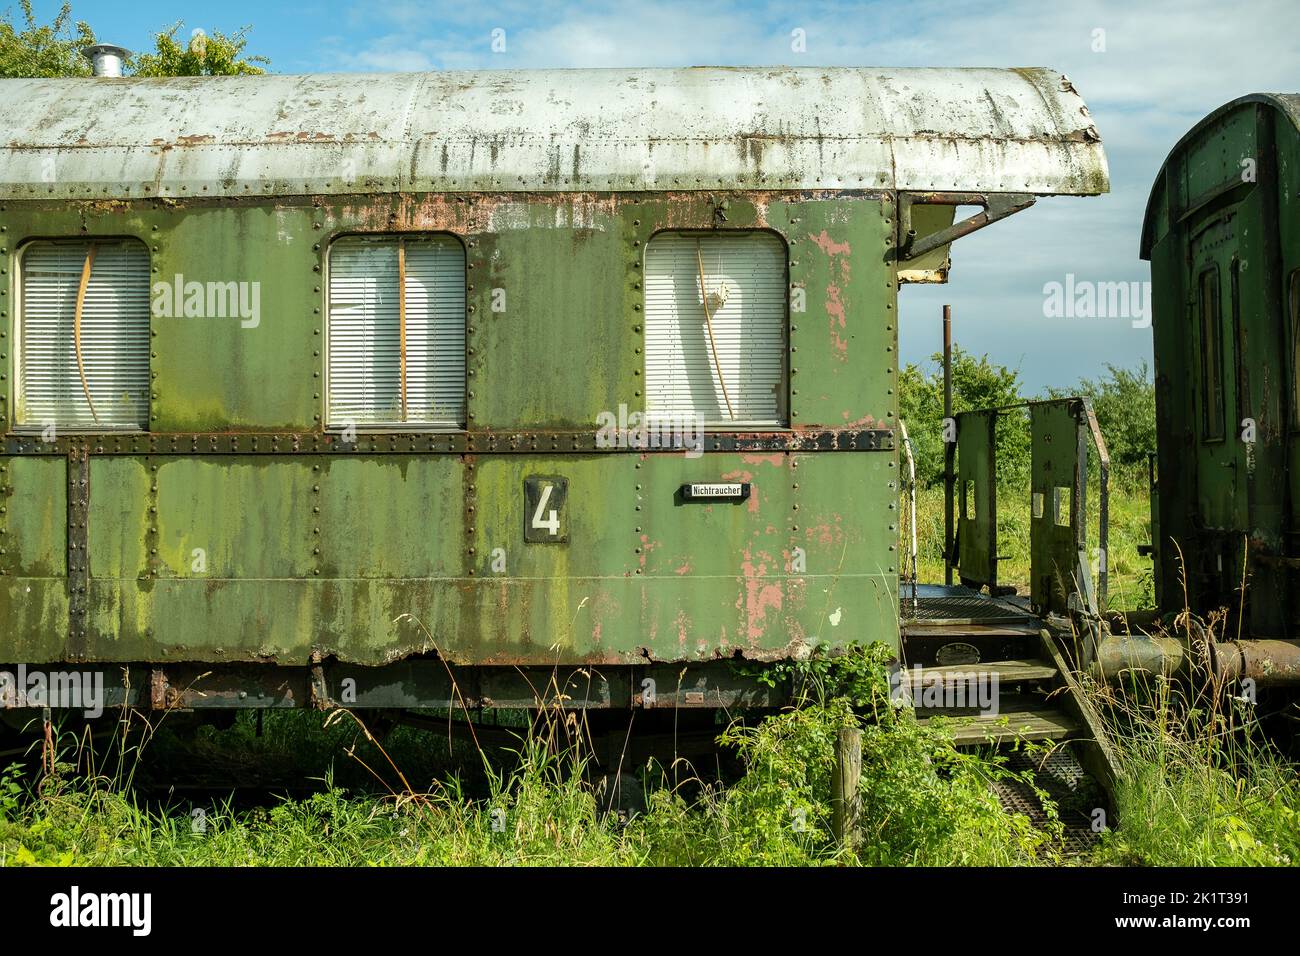 An old train wagon in a train museum Stock Photo